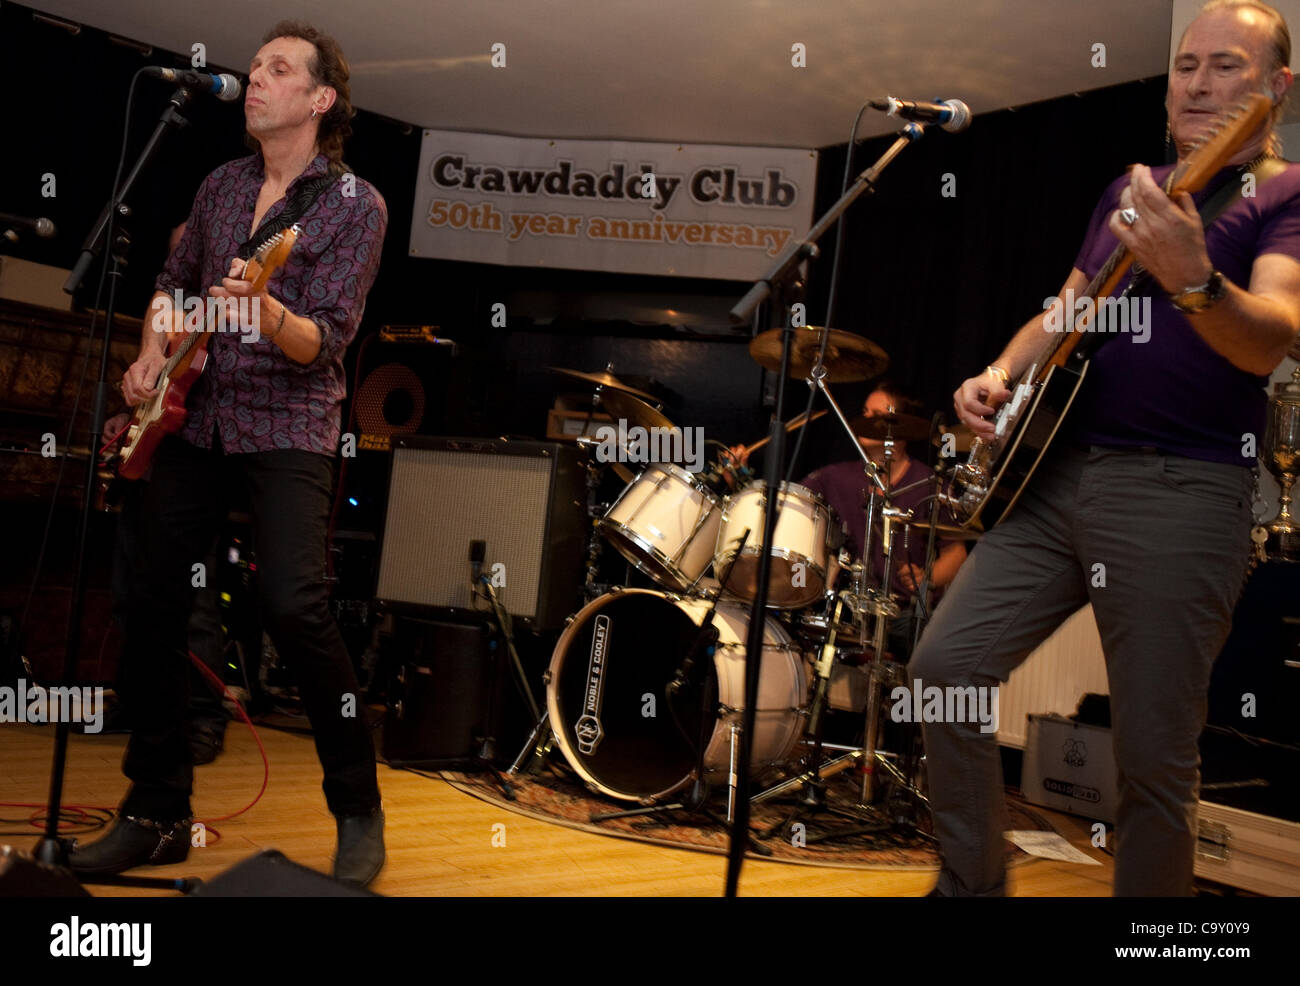 The iconic Crawdaddy Club is being revived on its 50th anniversary year at The Richmond Athletic Ground, where gigs were held in the 60's. The Blue Bishops perform, from left to right: Geoff Grange, Justin Hildreth and Simon Burrett. Stock Photo